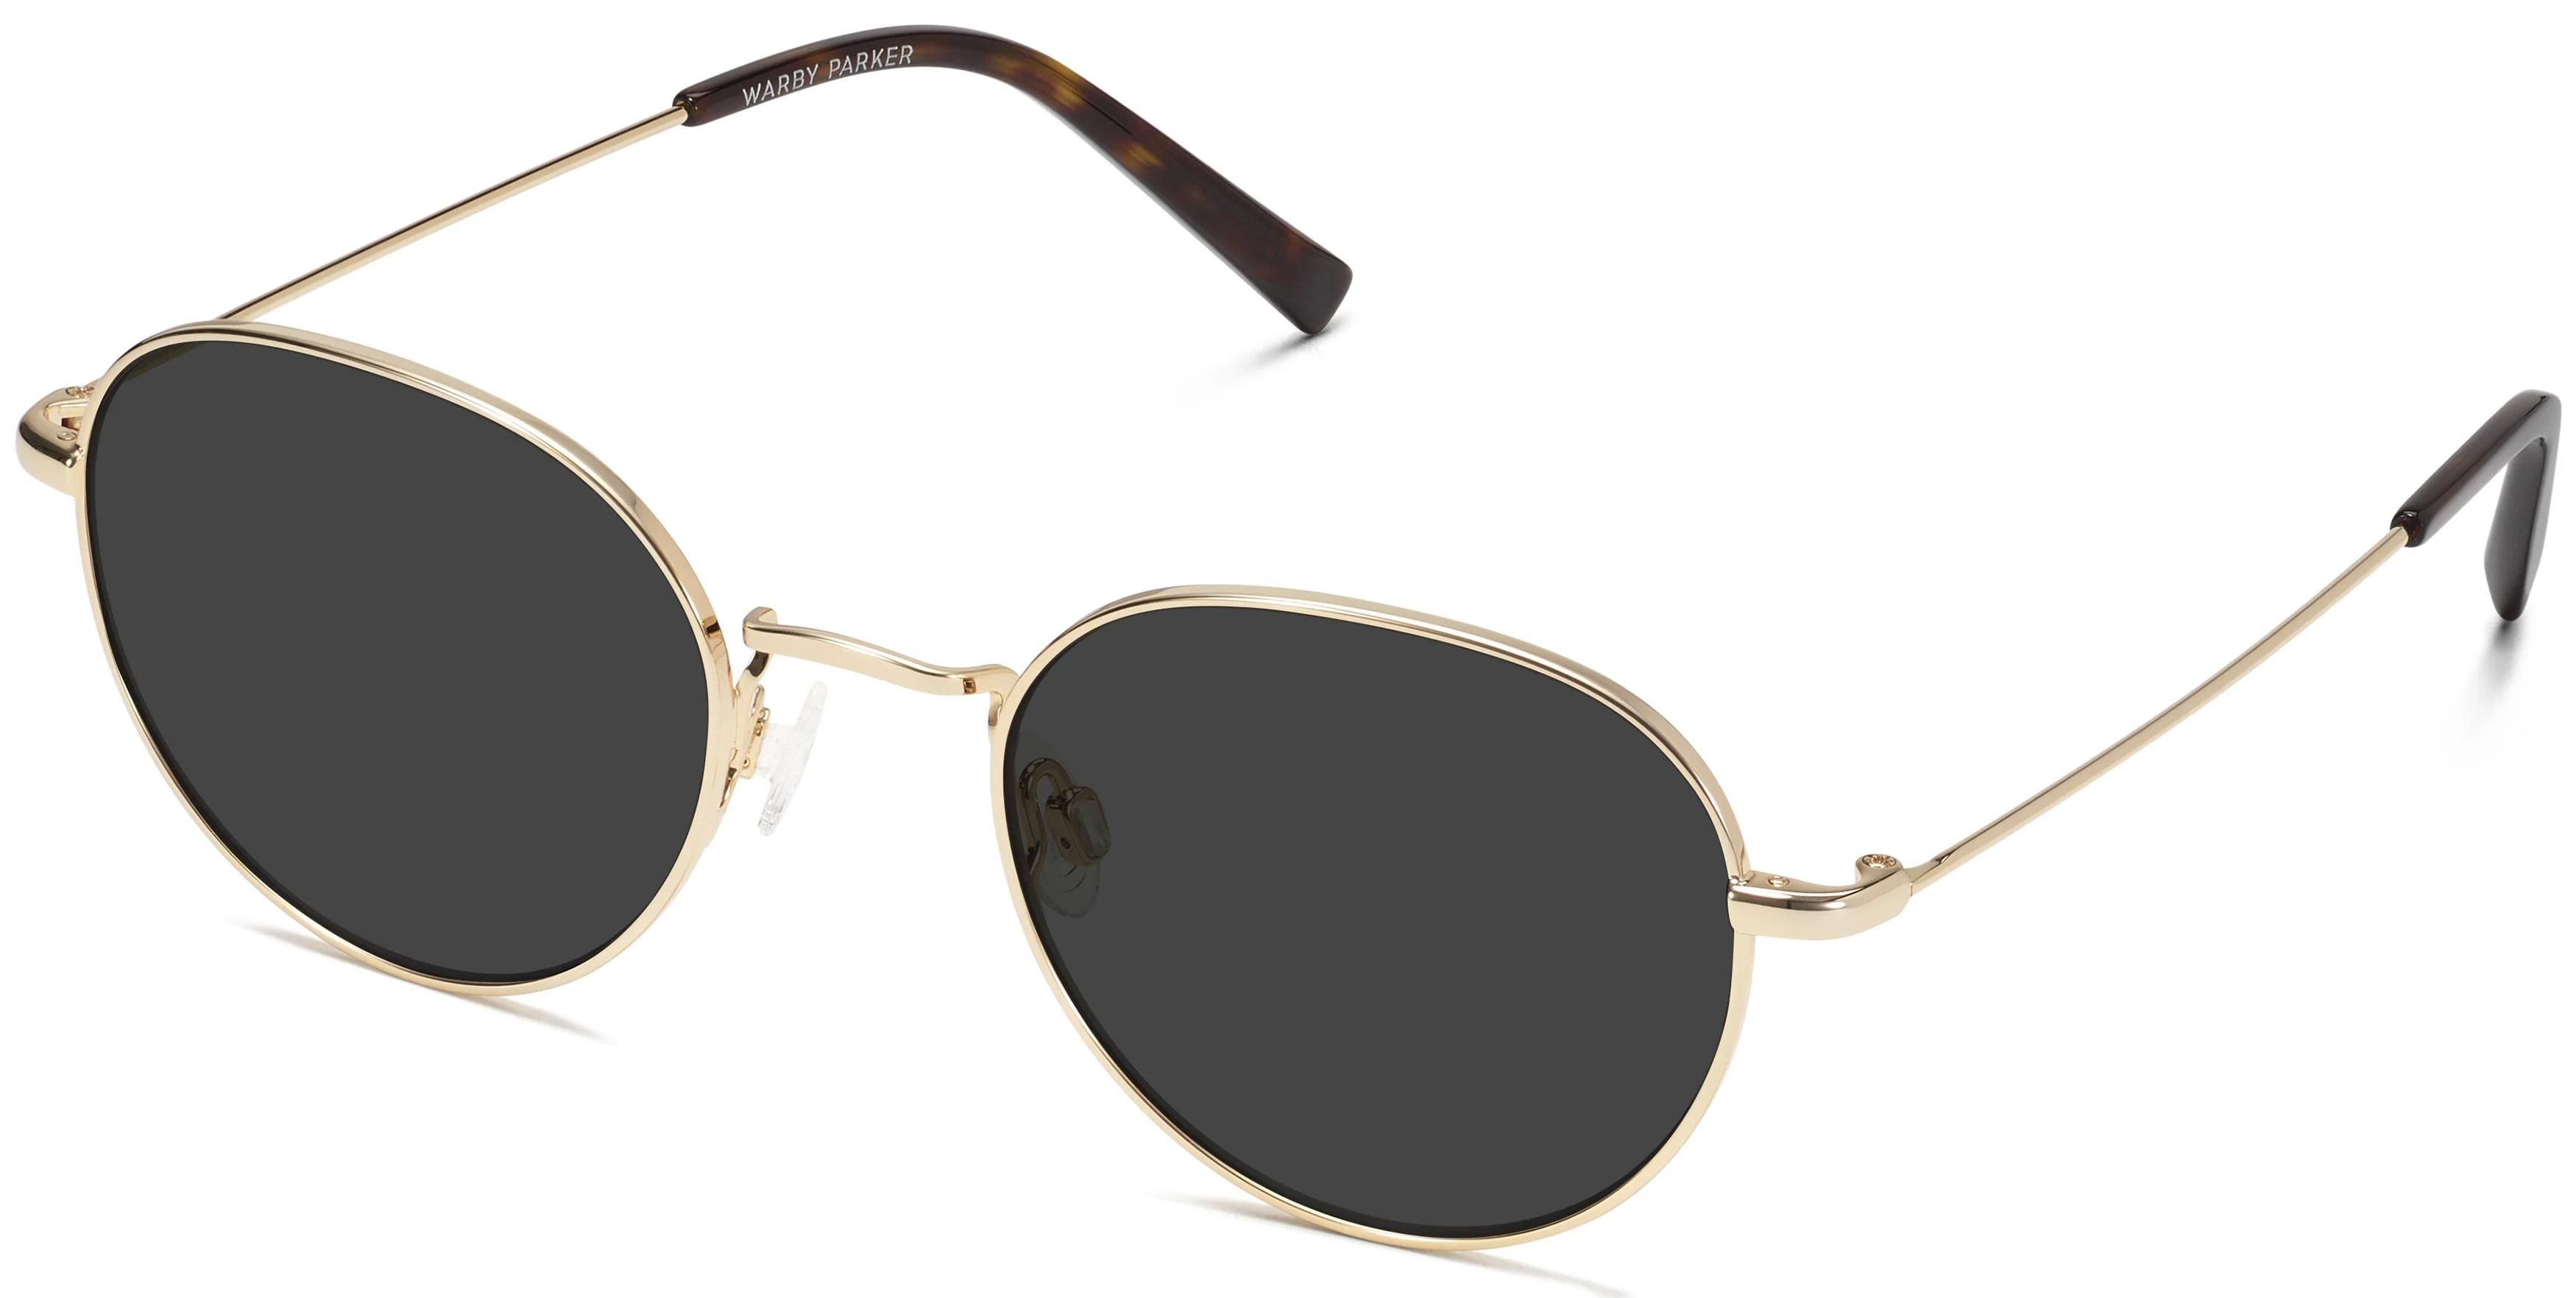 Carlotta Sunglasses in Polished Gold | Warby Parker | Warby Parker (US)